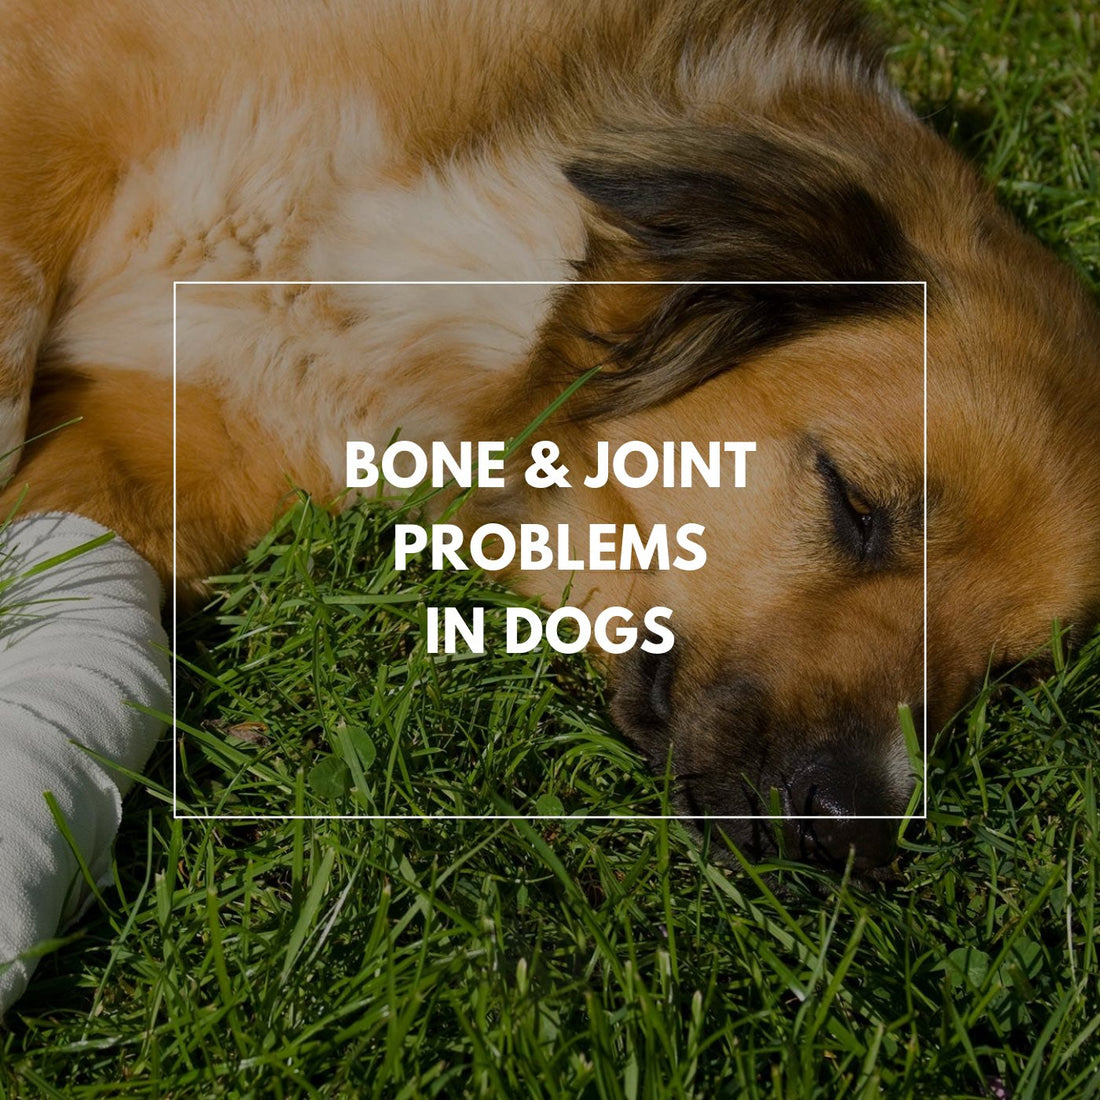 Bone & Joint Problems in Dogs - Proflax